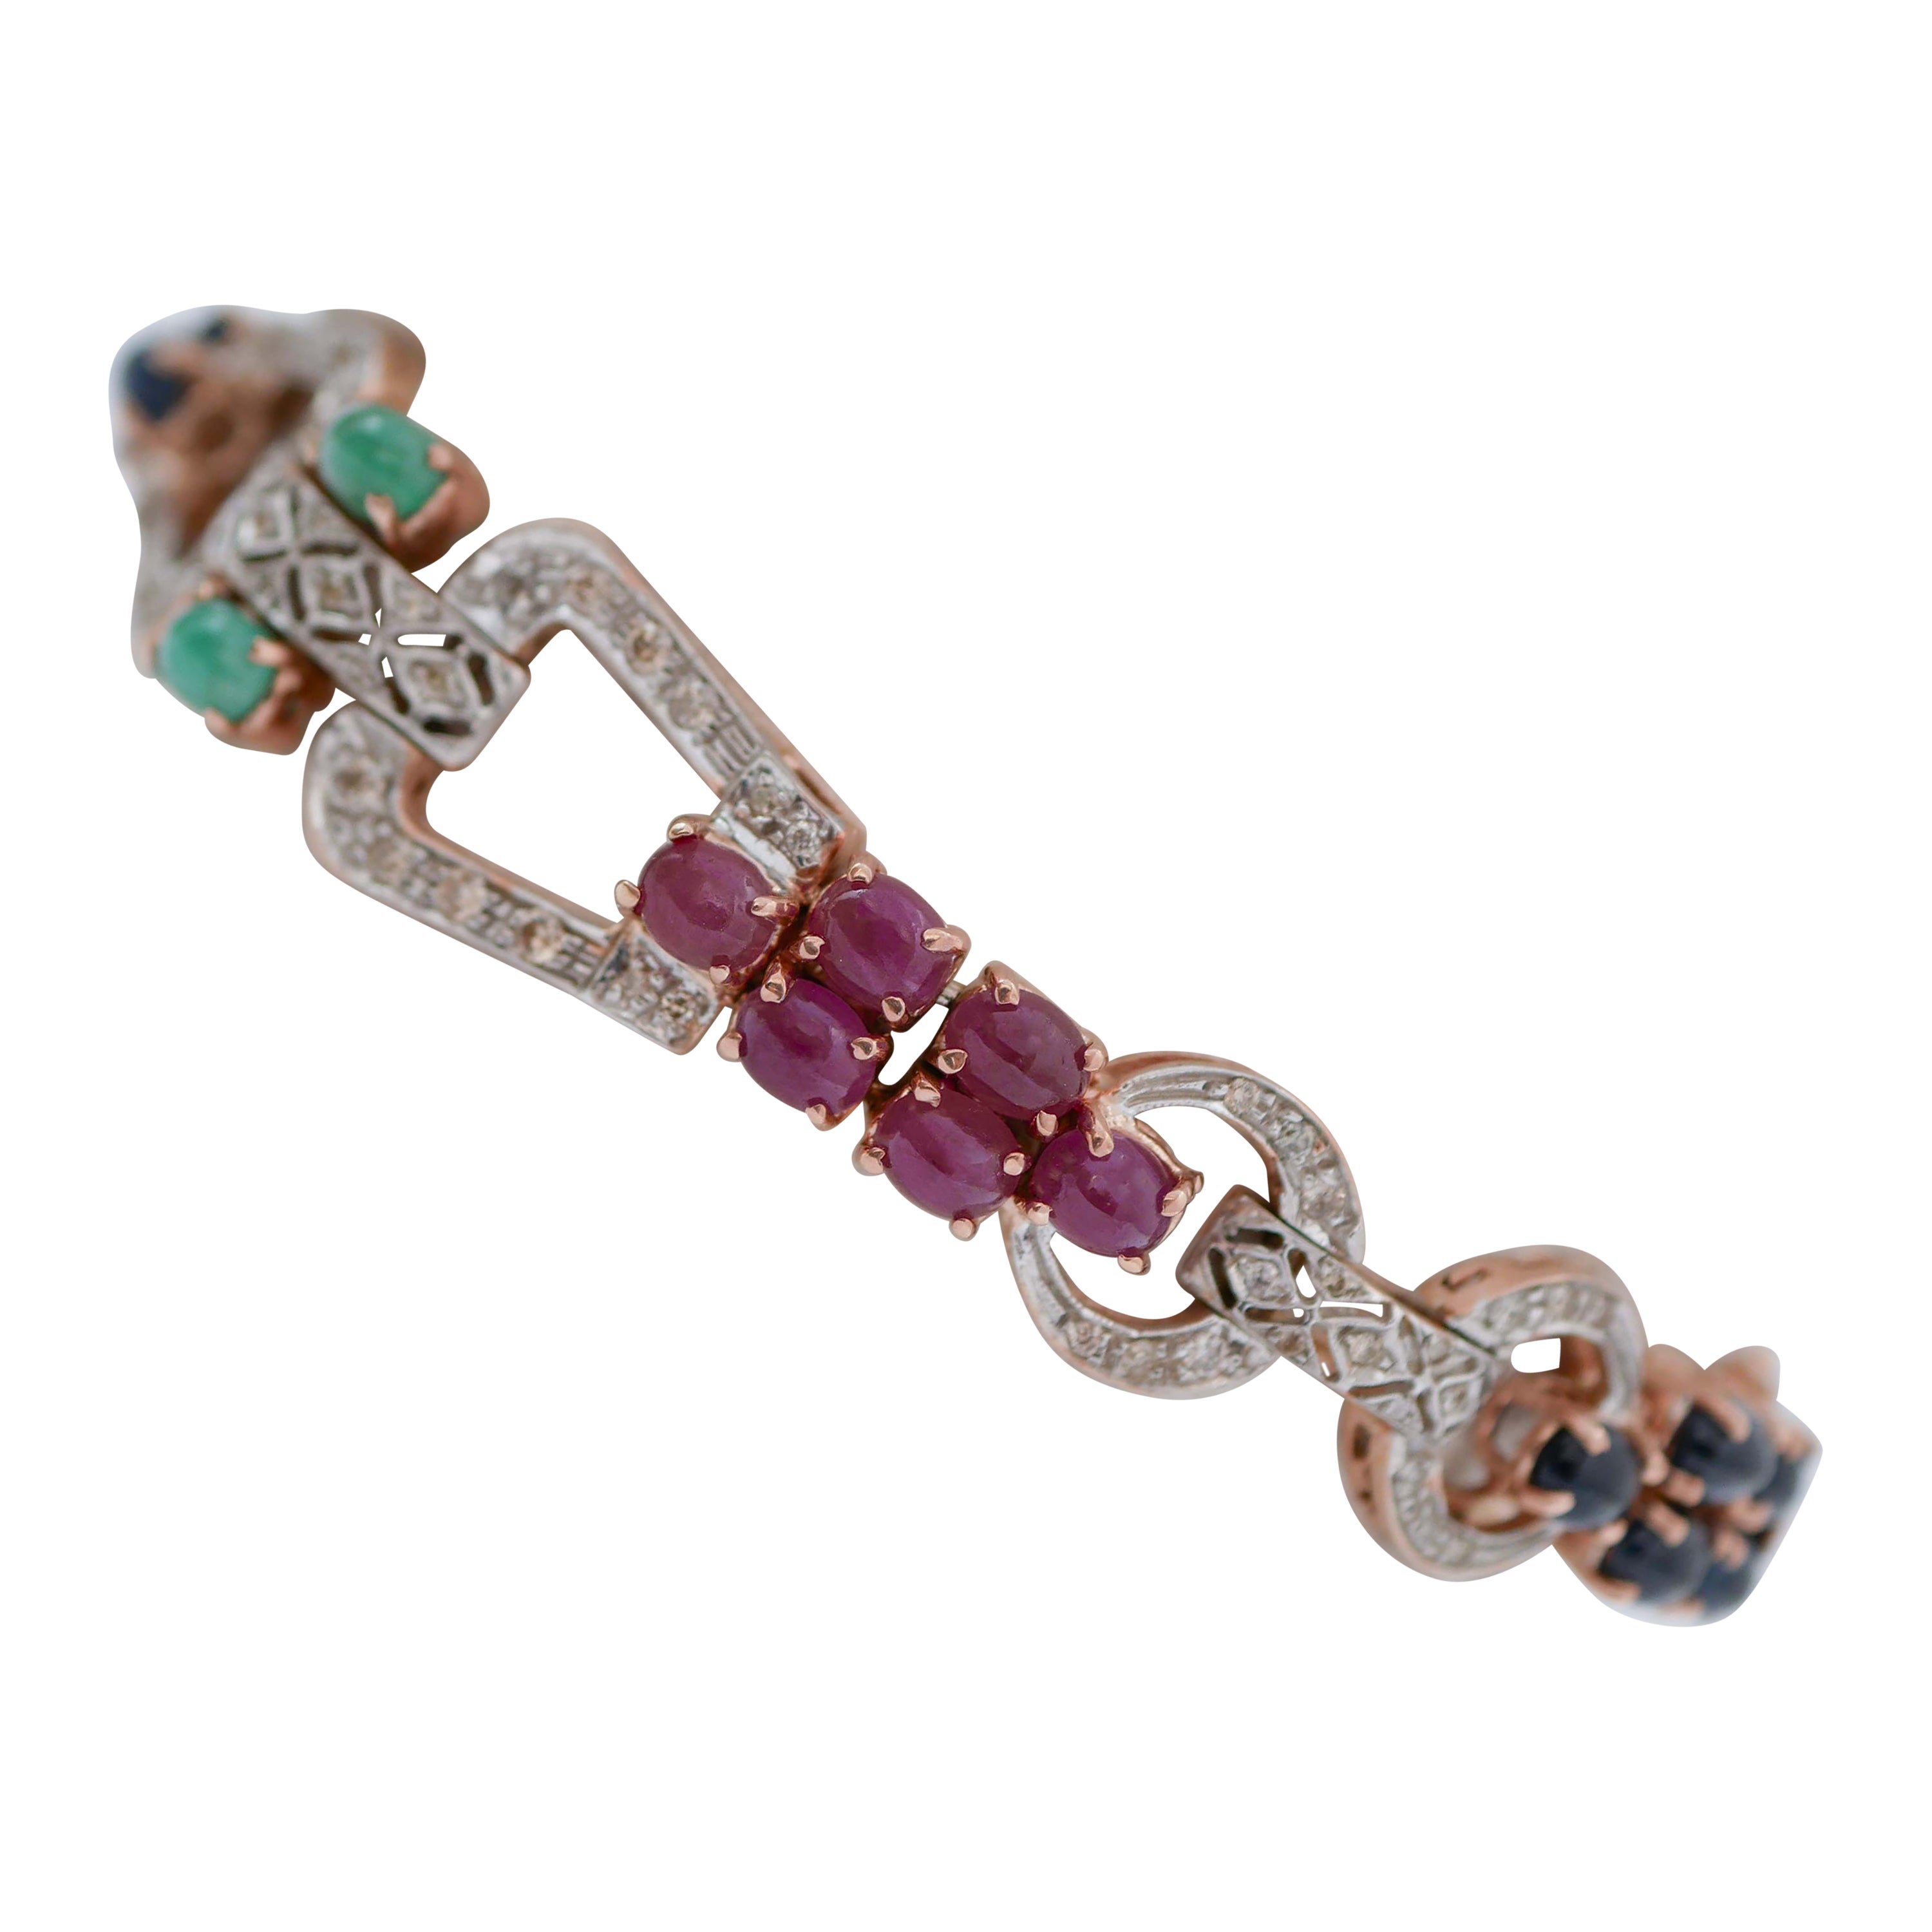 Rubies, Sapphires, Emeralds, Diamonds, Rose Gold and Silver Bracelet.